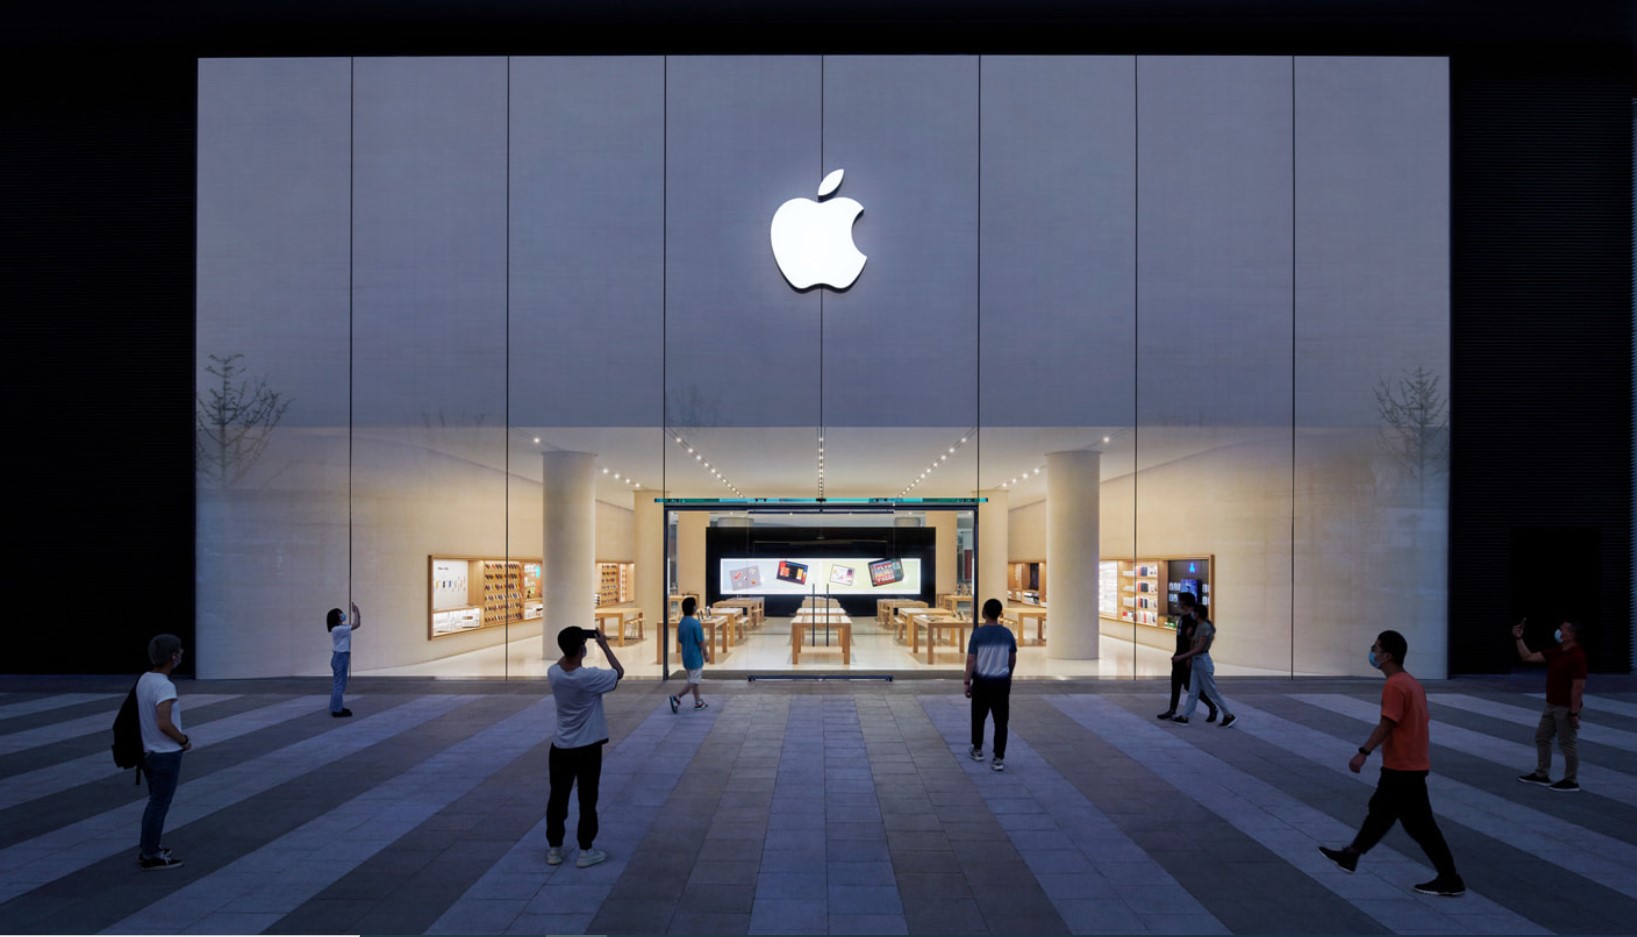 Apple closed its store and cancelled services in Russia